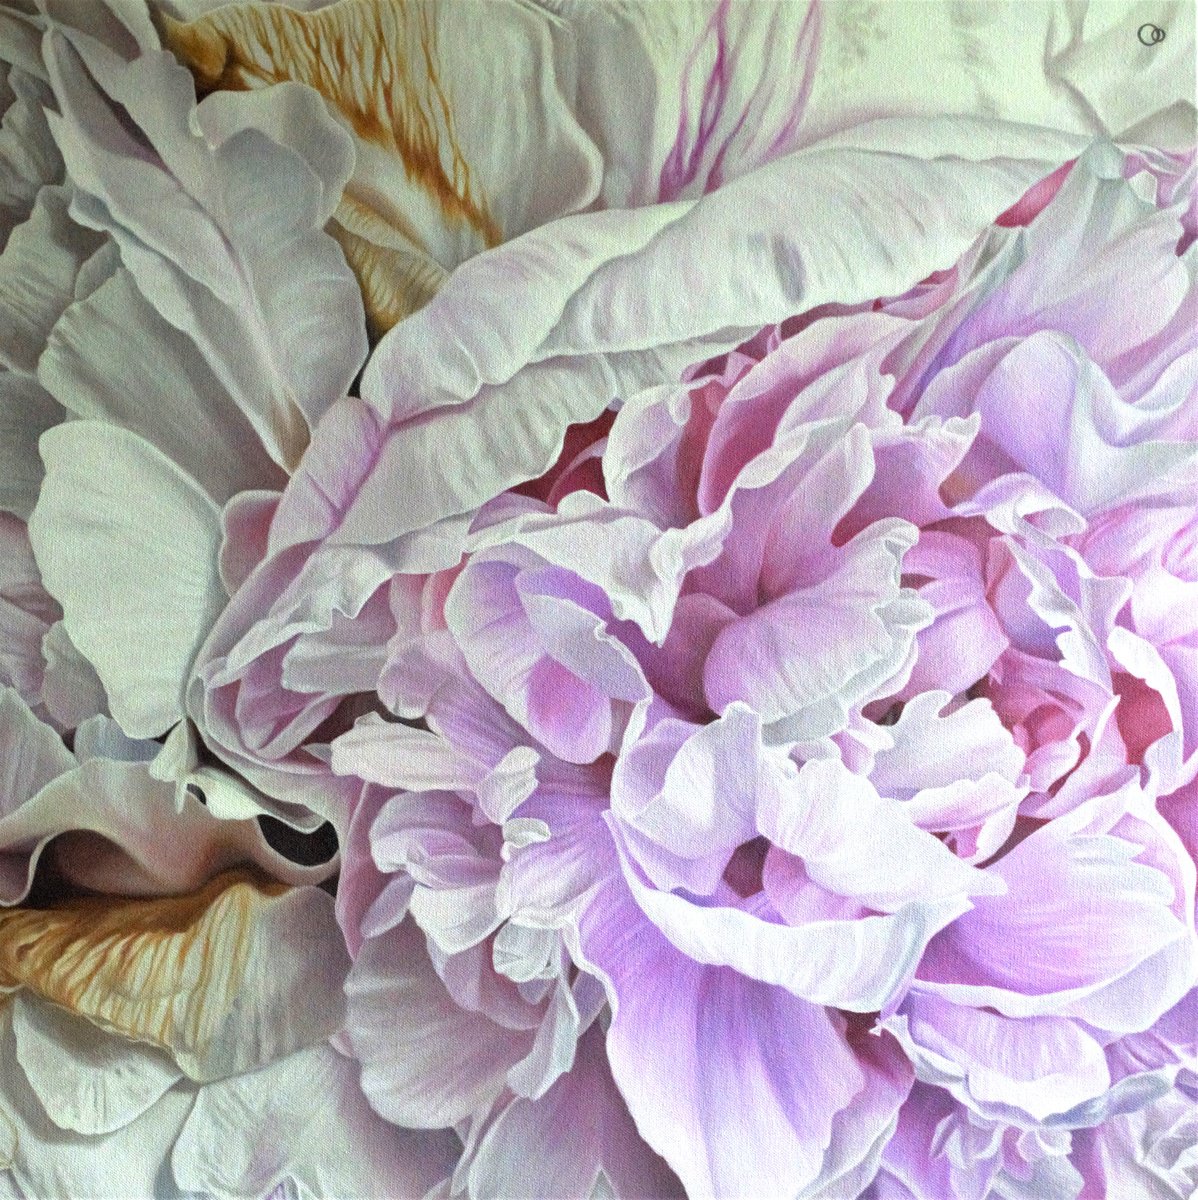 Momentary Bliss - Close-up Peony Flower Painting by Veronique Oodian